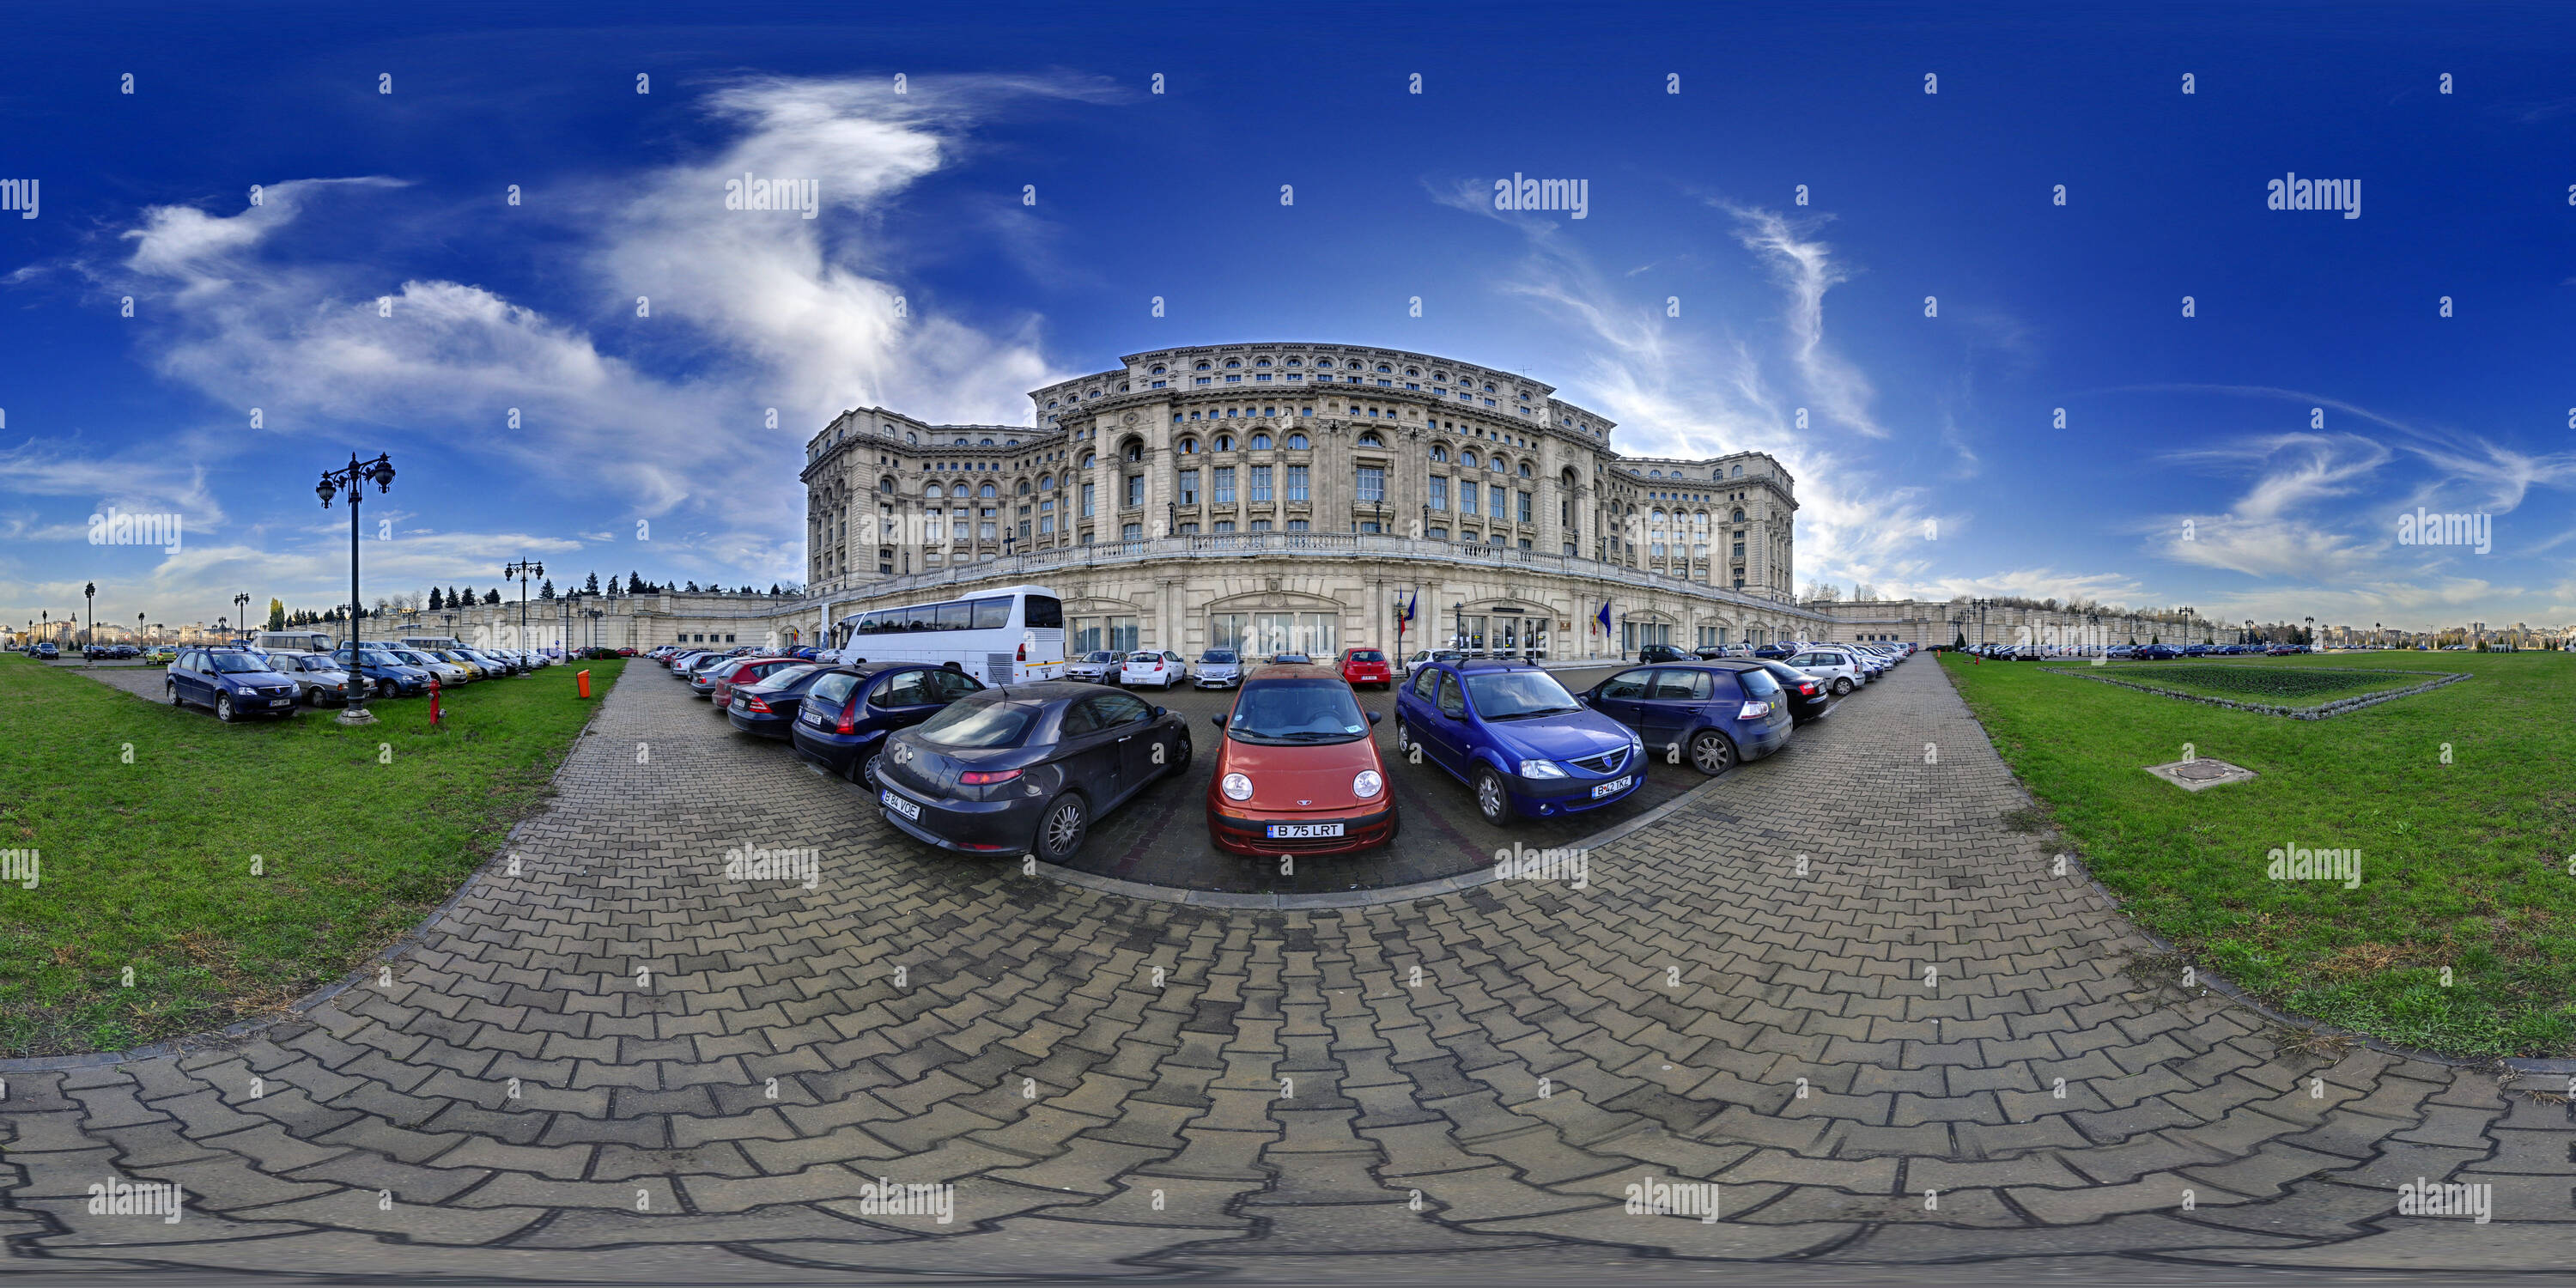 360 degree panoramic view of The Romanian Parliament